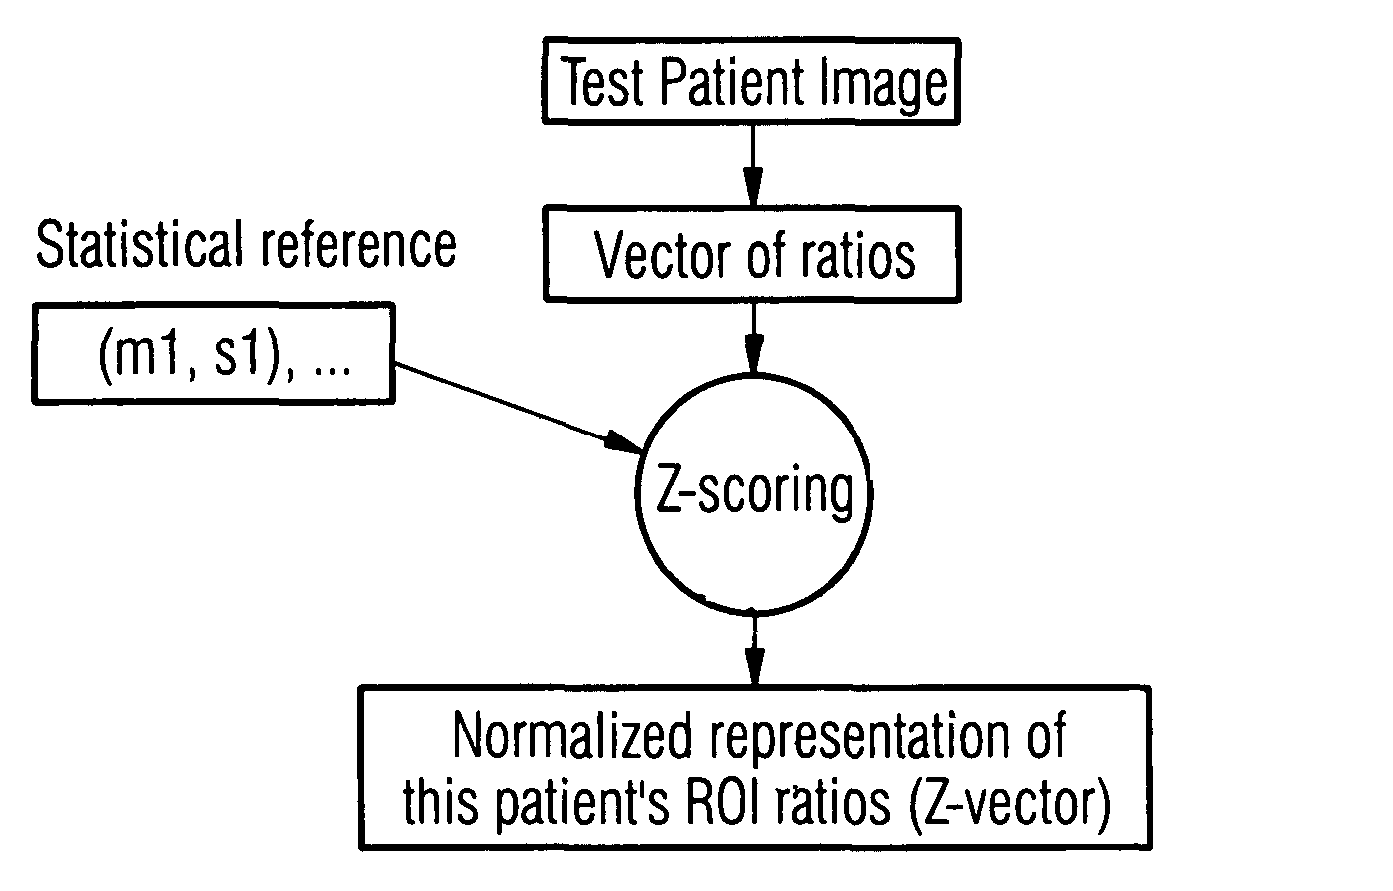 ROI-based assessment of abnormality using transformation invariant features